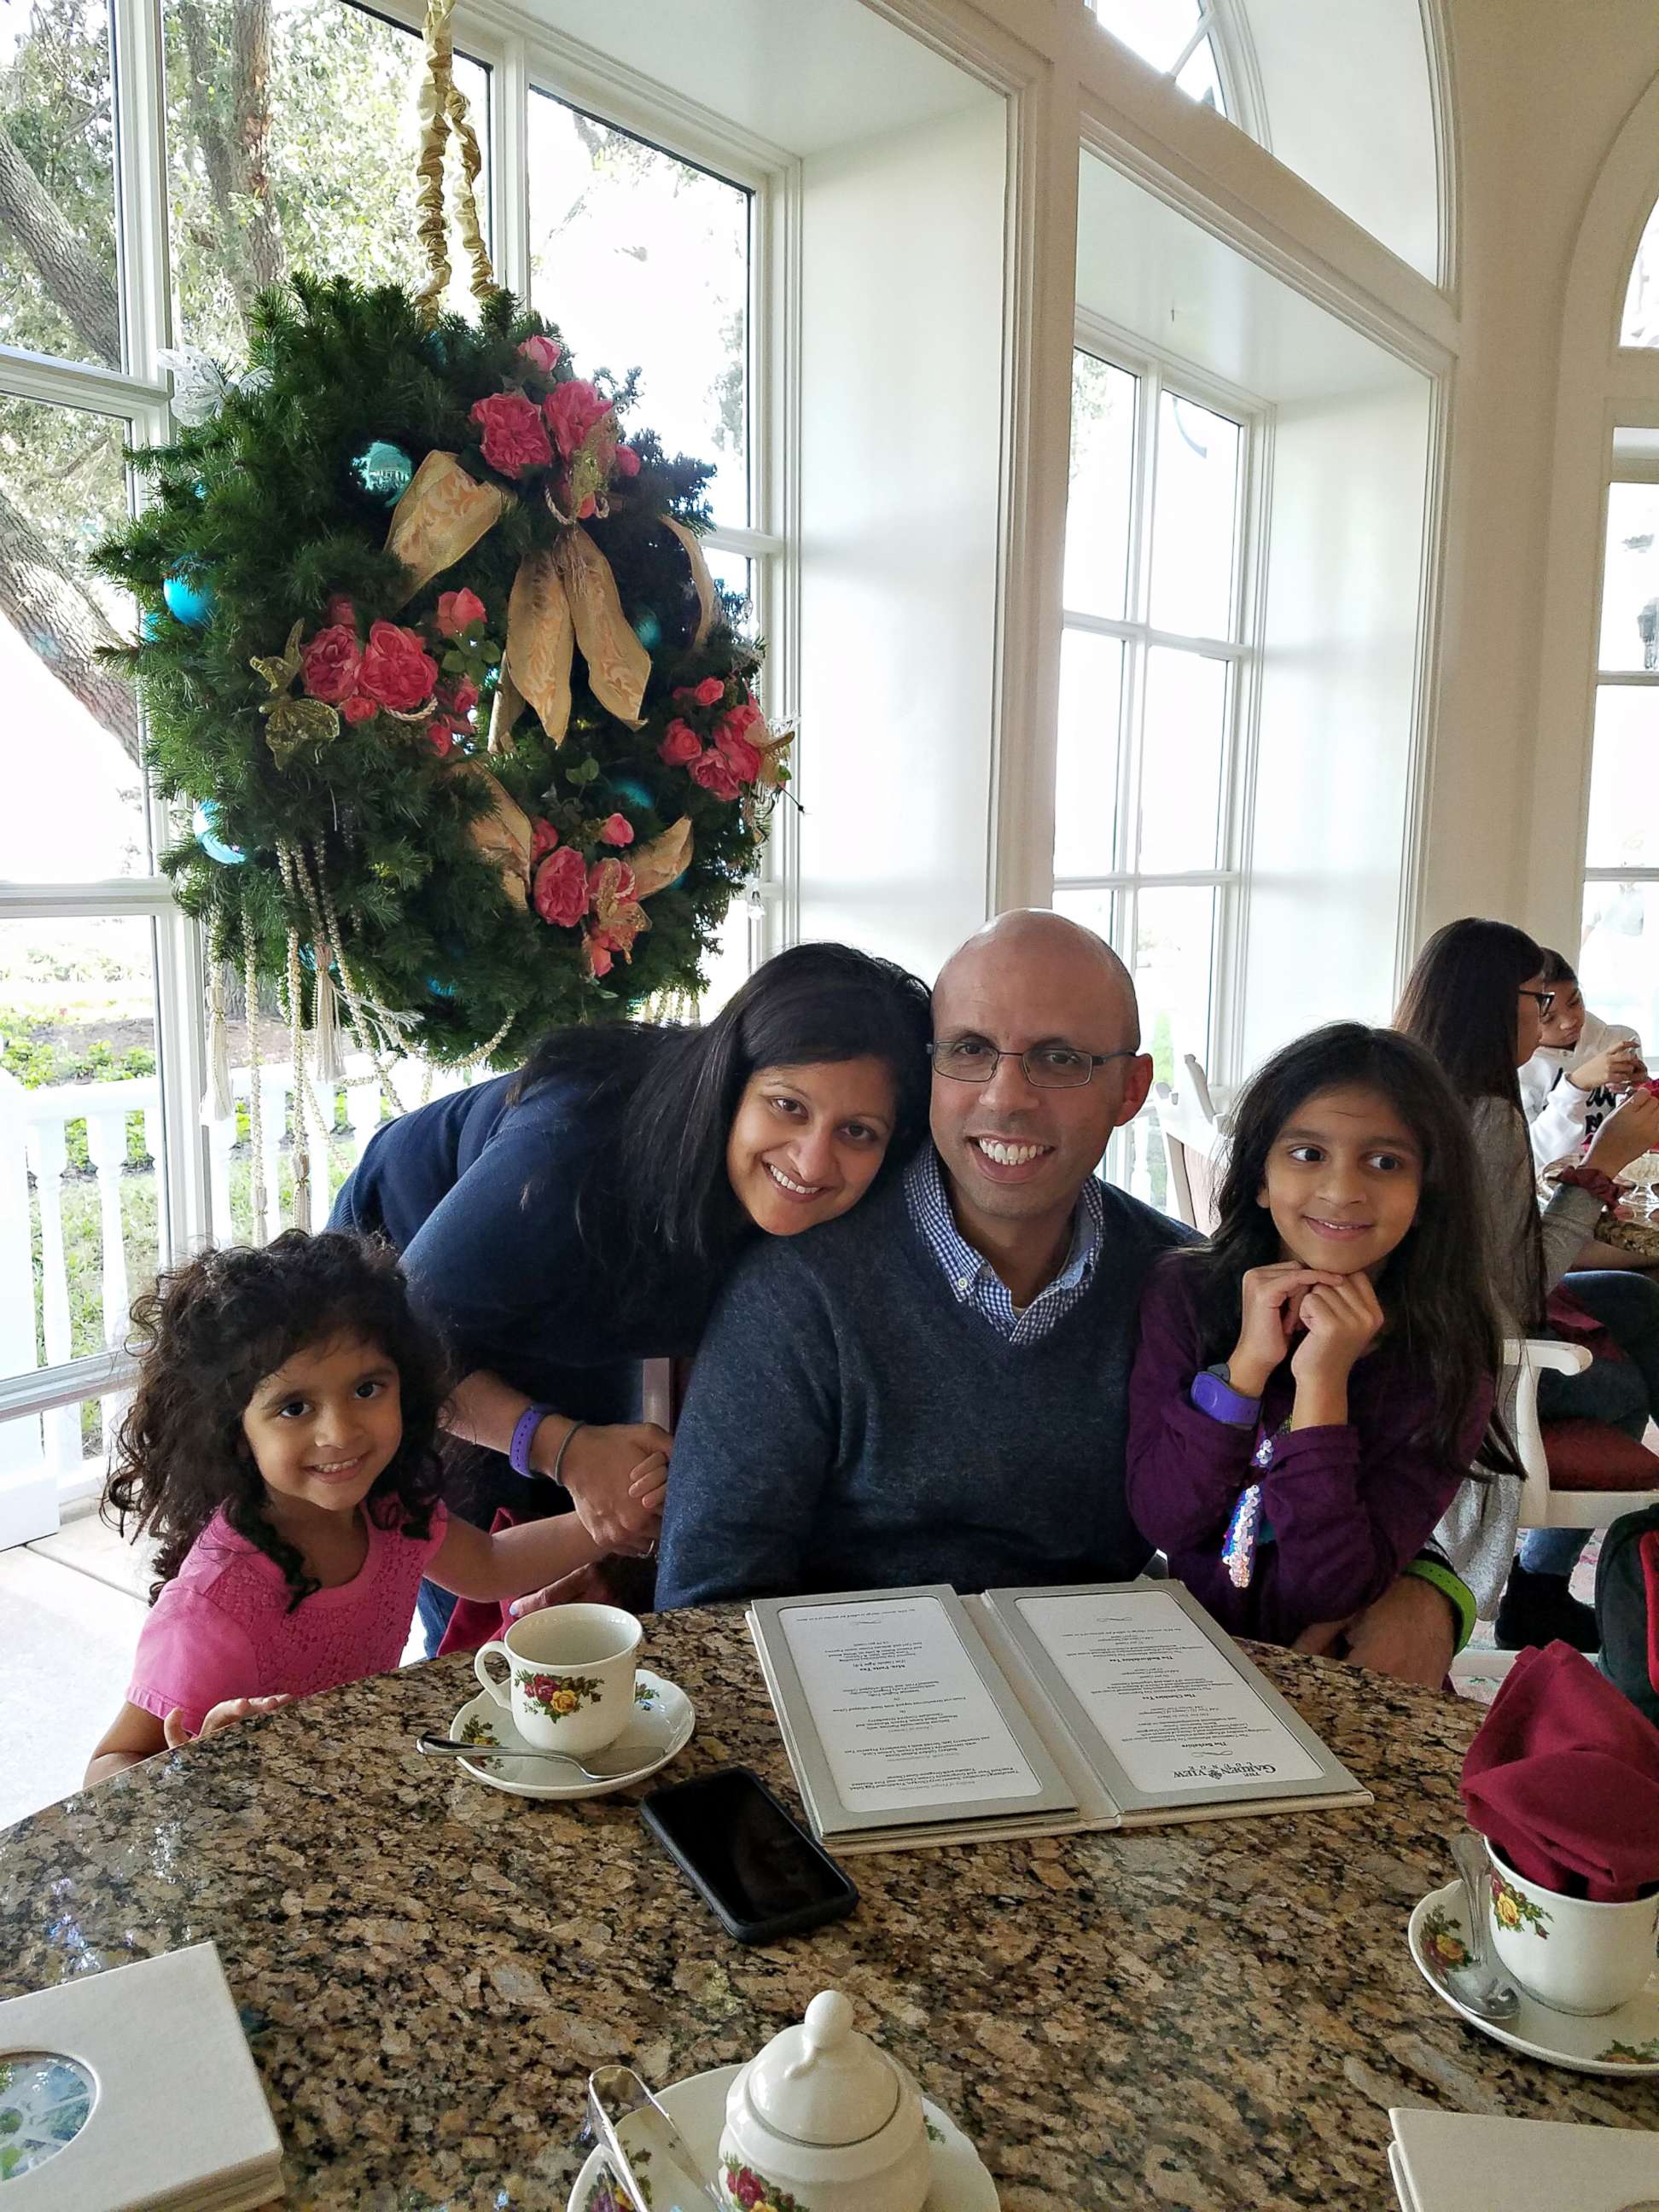 PHOTO: Leena and Sunil Saini, of Newtown, Pennsylvania, pose with their daughters Kirina and Ela in this undated family photo.